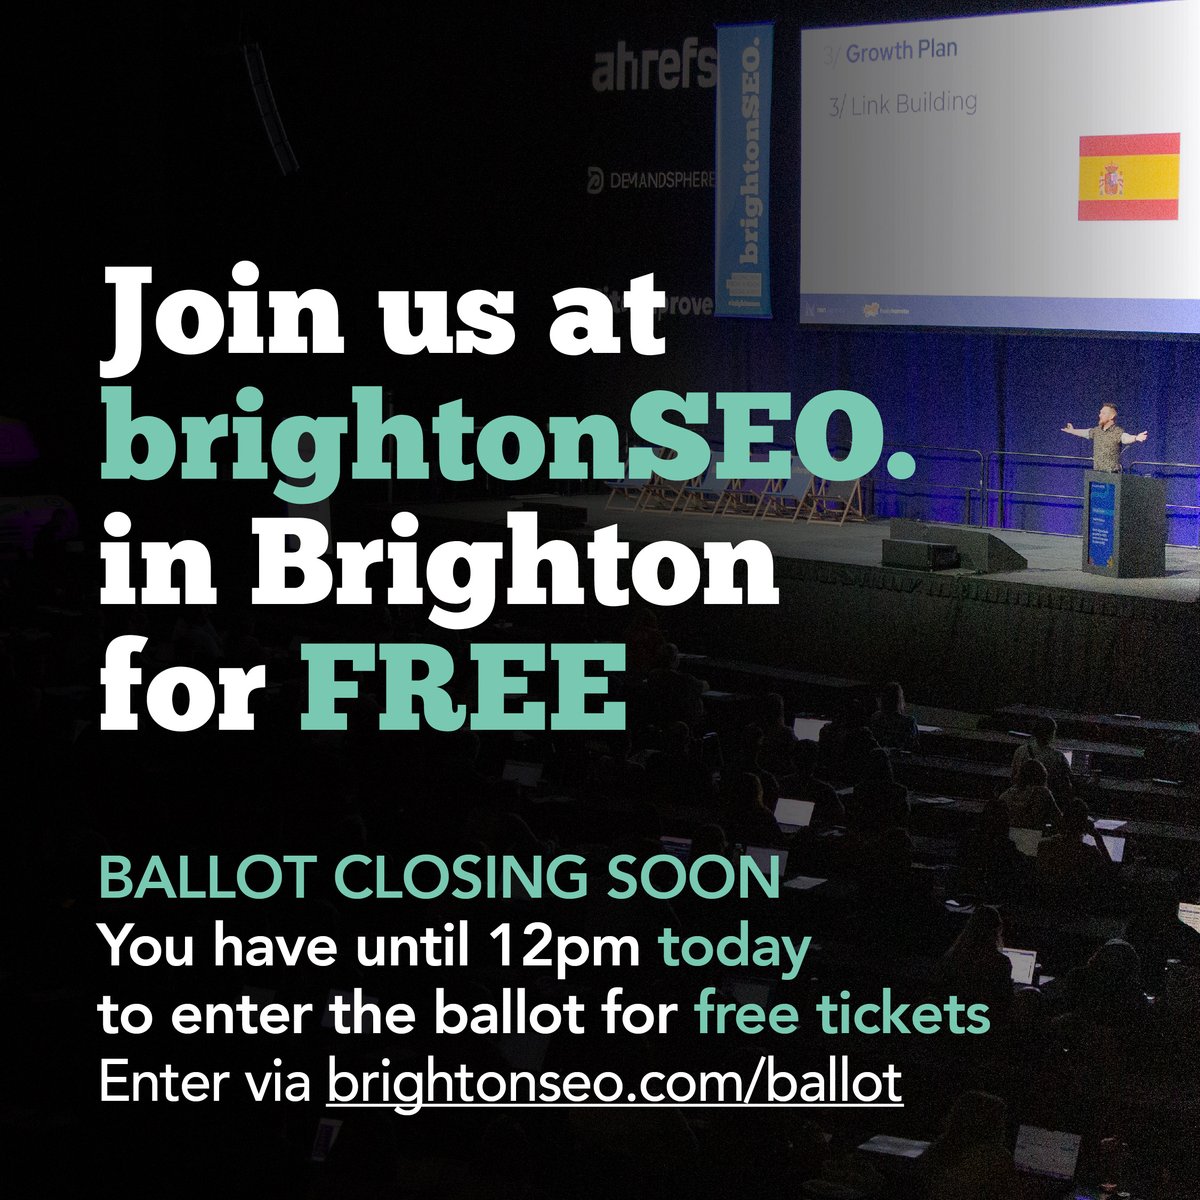 #BRIGHTONSEO FREE TICKET BALLOT CLOSING SOON!

APPLY BY 12PM TODAY.

SORRY FOR SHOUTING BUT MY KEYBOARD IS BROKEN.

docs.google.com/forms/d/e/1FAI…